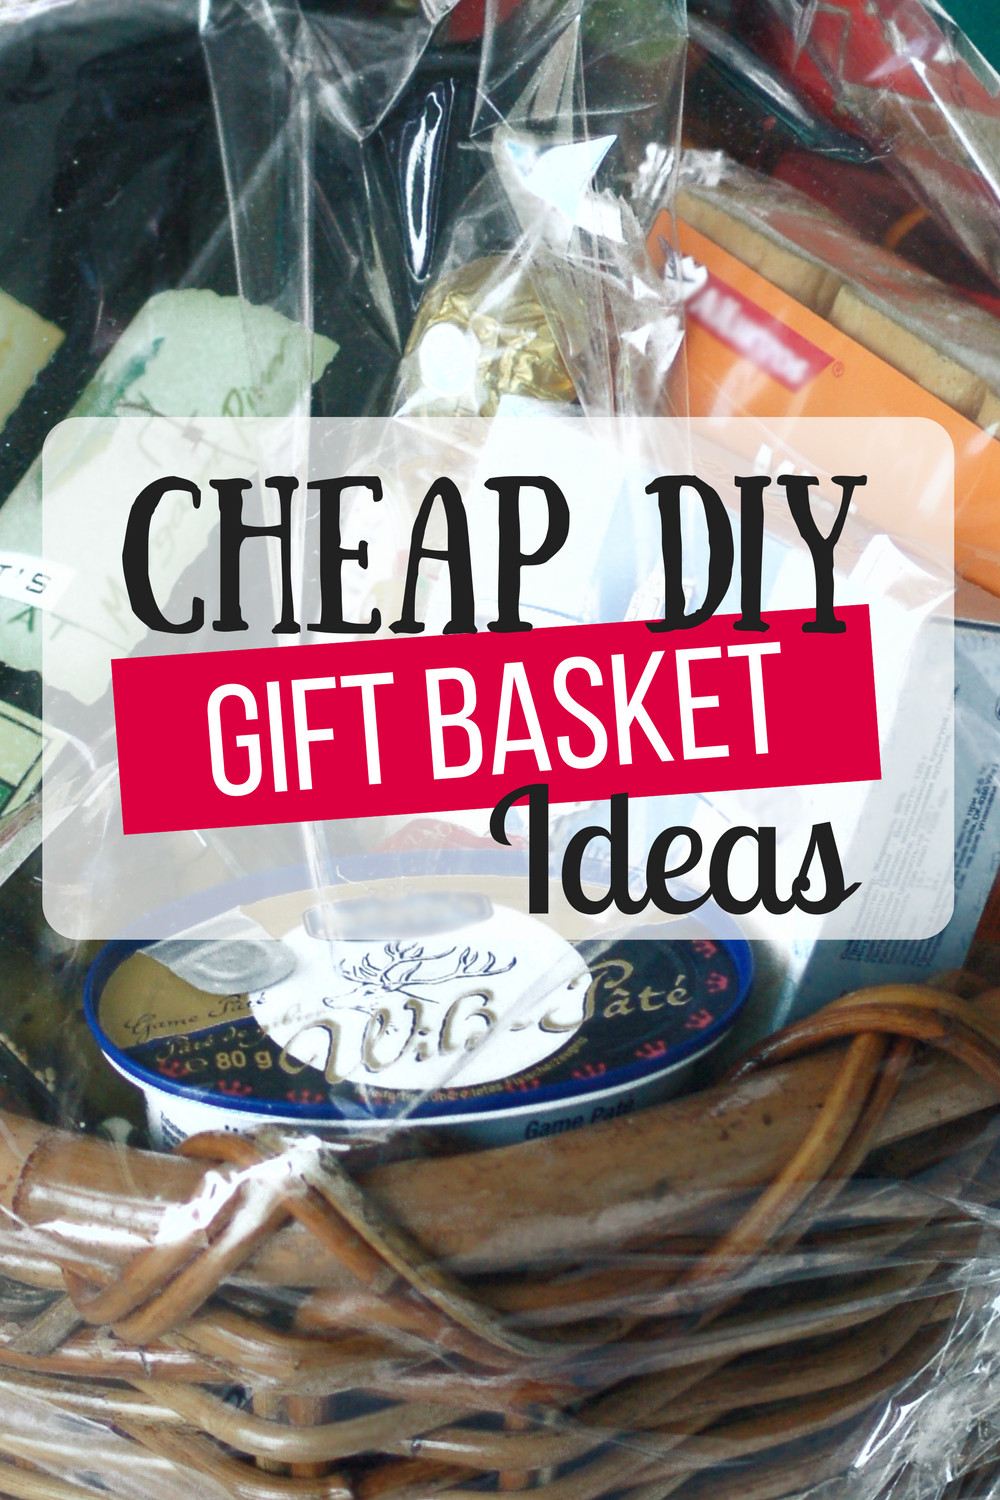 Cheap Holiday Gift Basket Ideas
 Cheap DIY Gift Baskets The Busy Bud er